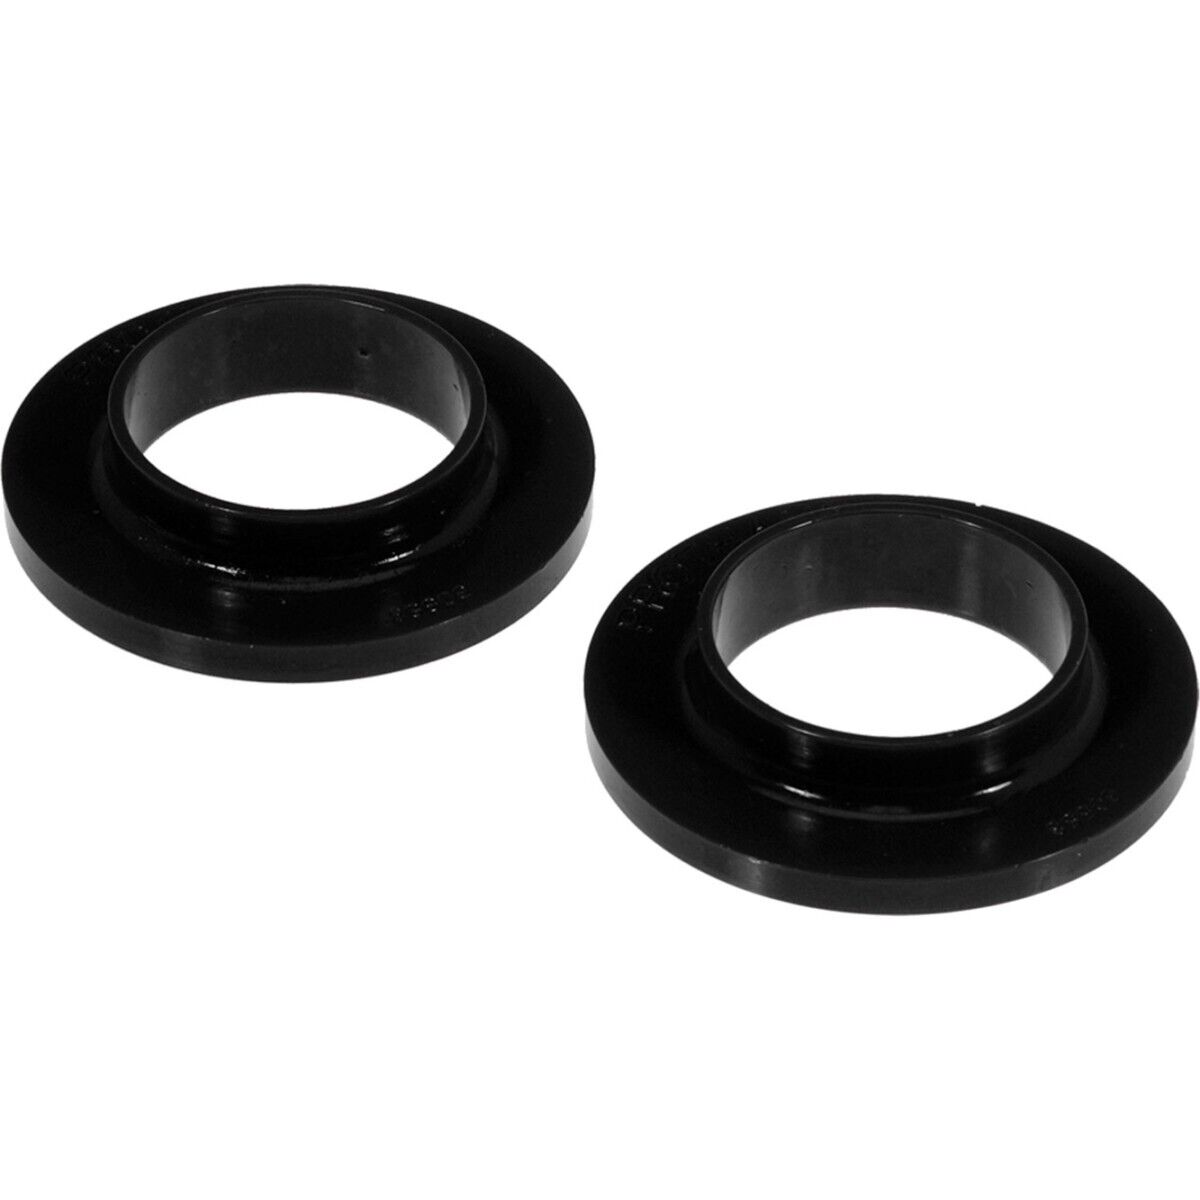 7-1706-BL Prothane Coil Spring Insulators Set of 2 Rear Upper for Chevy Pair